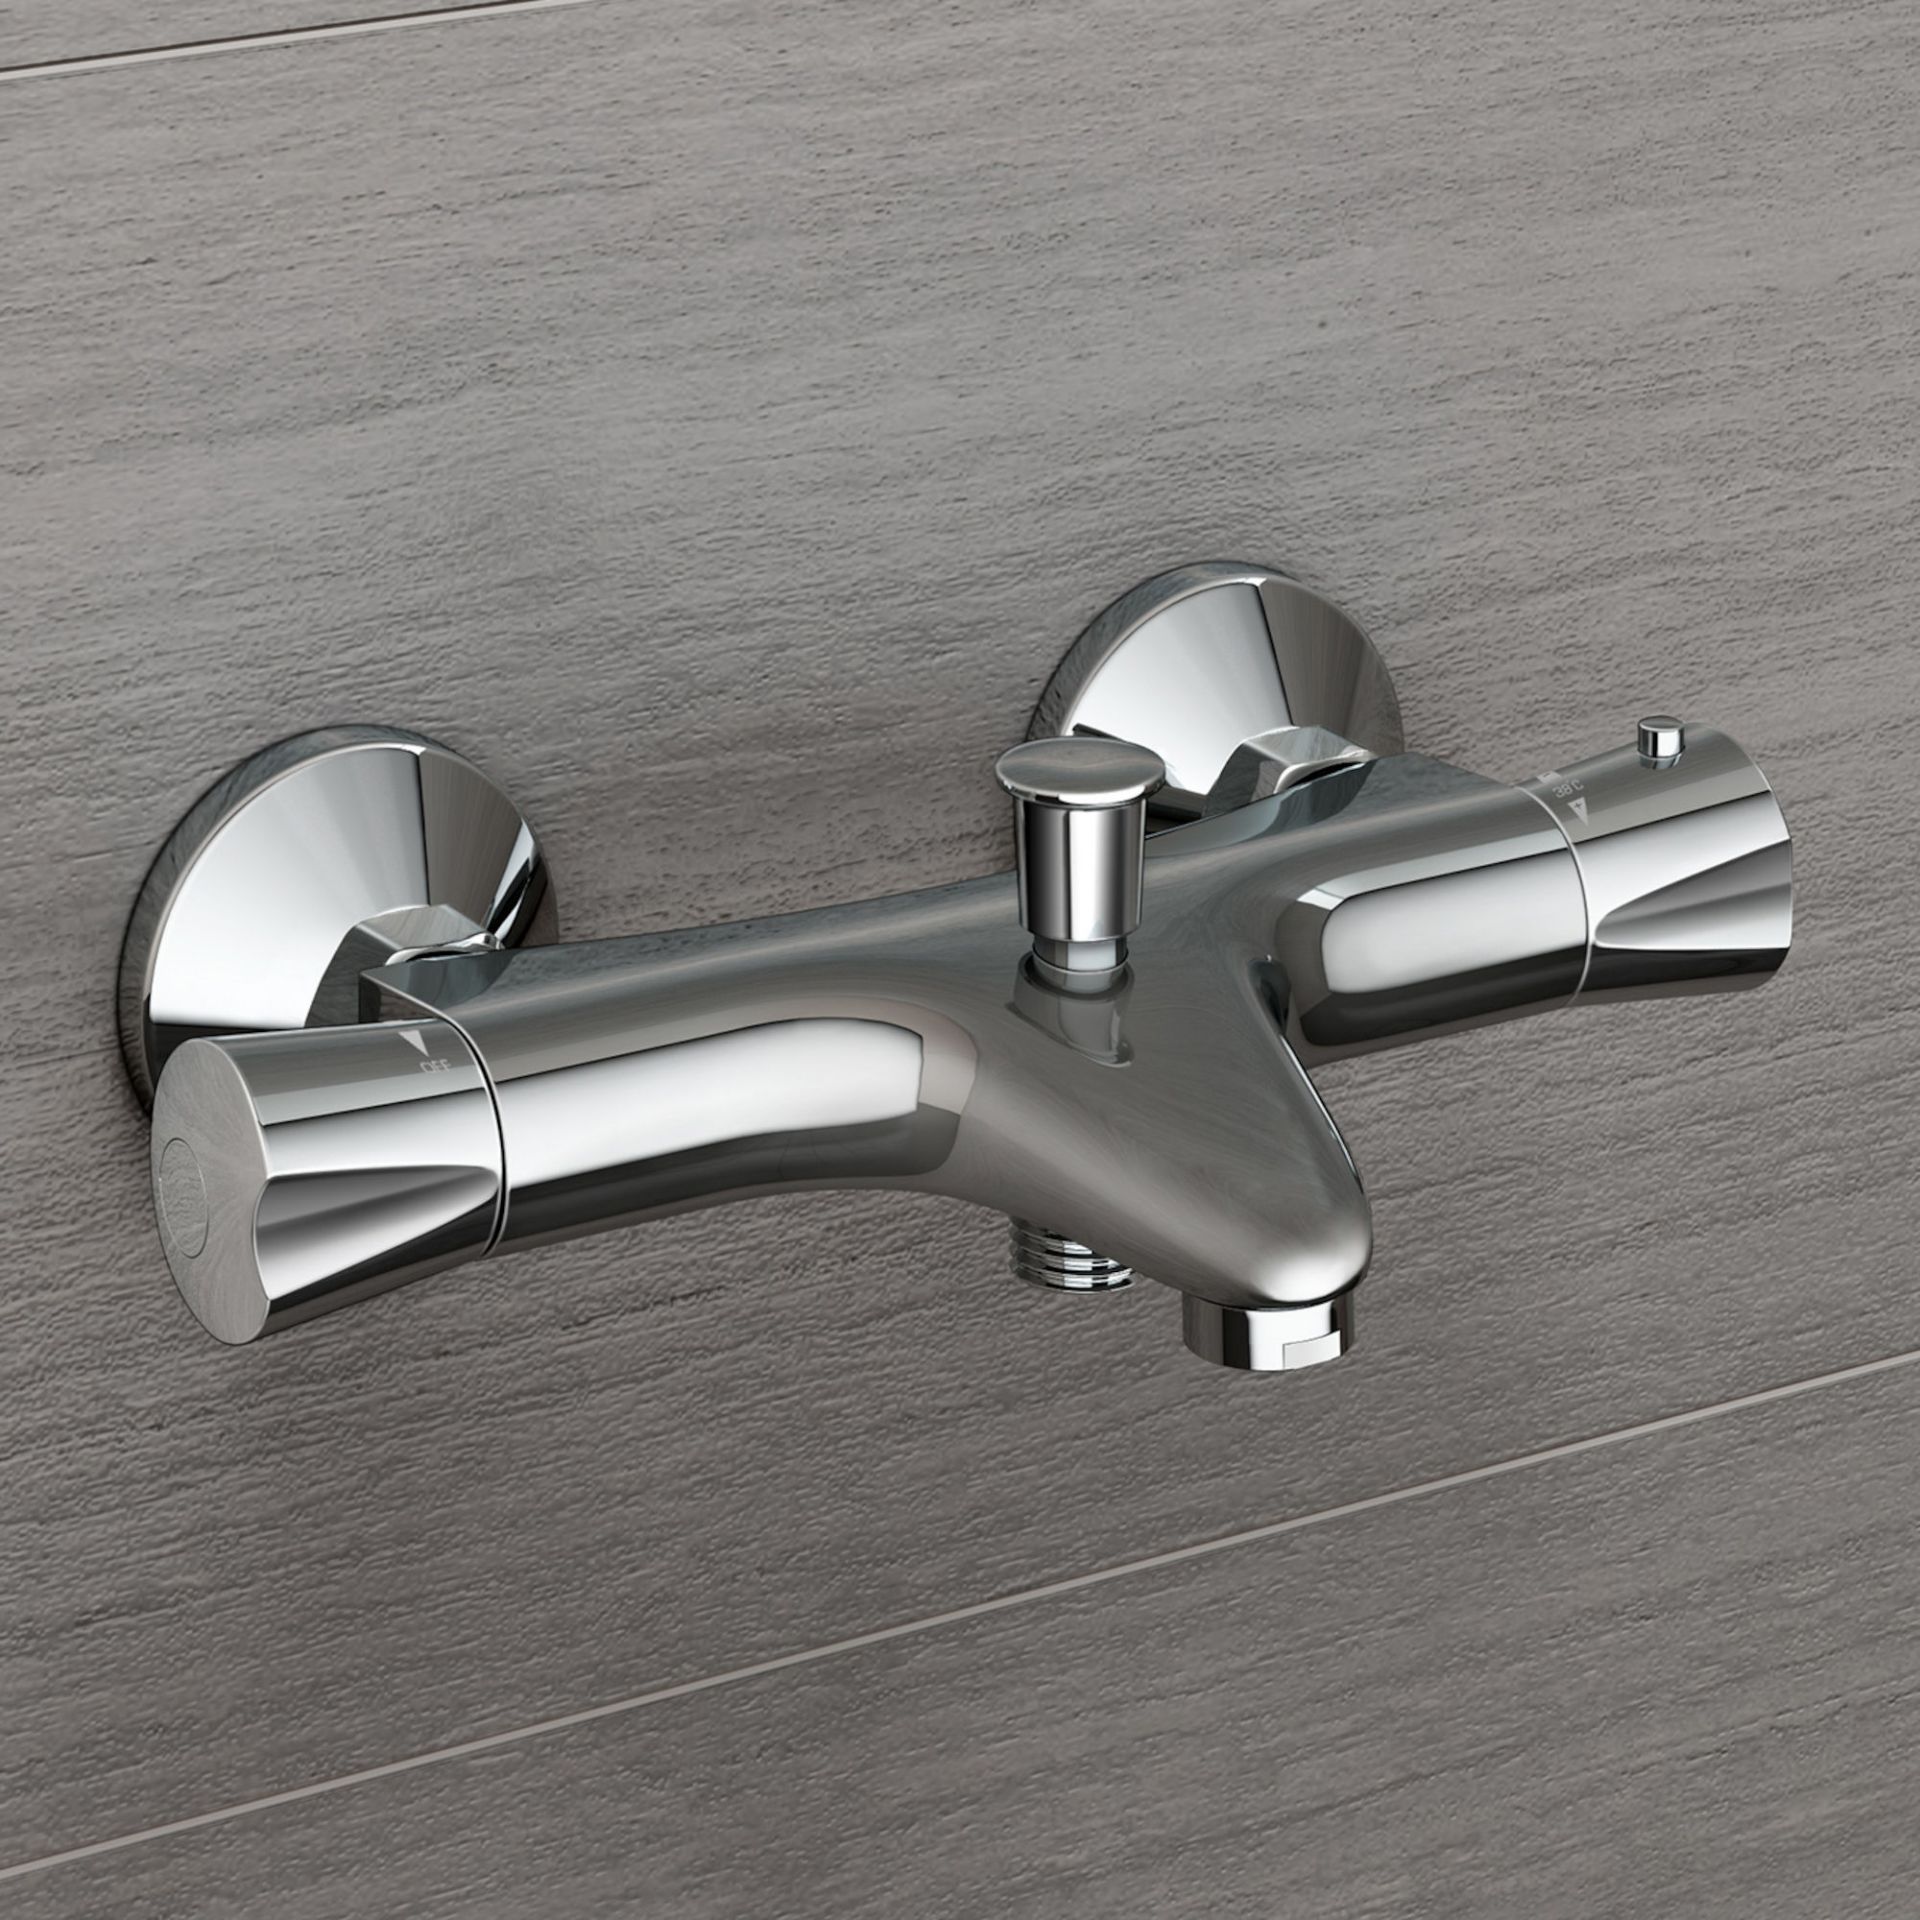 (W40) Shower Mixer Valve with Bath Filler. Chrome Plated Solid Brass Mixer Thermostatic mixer